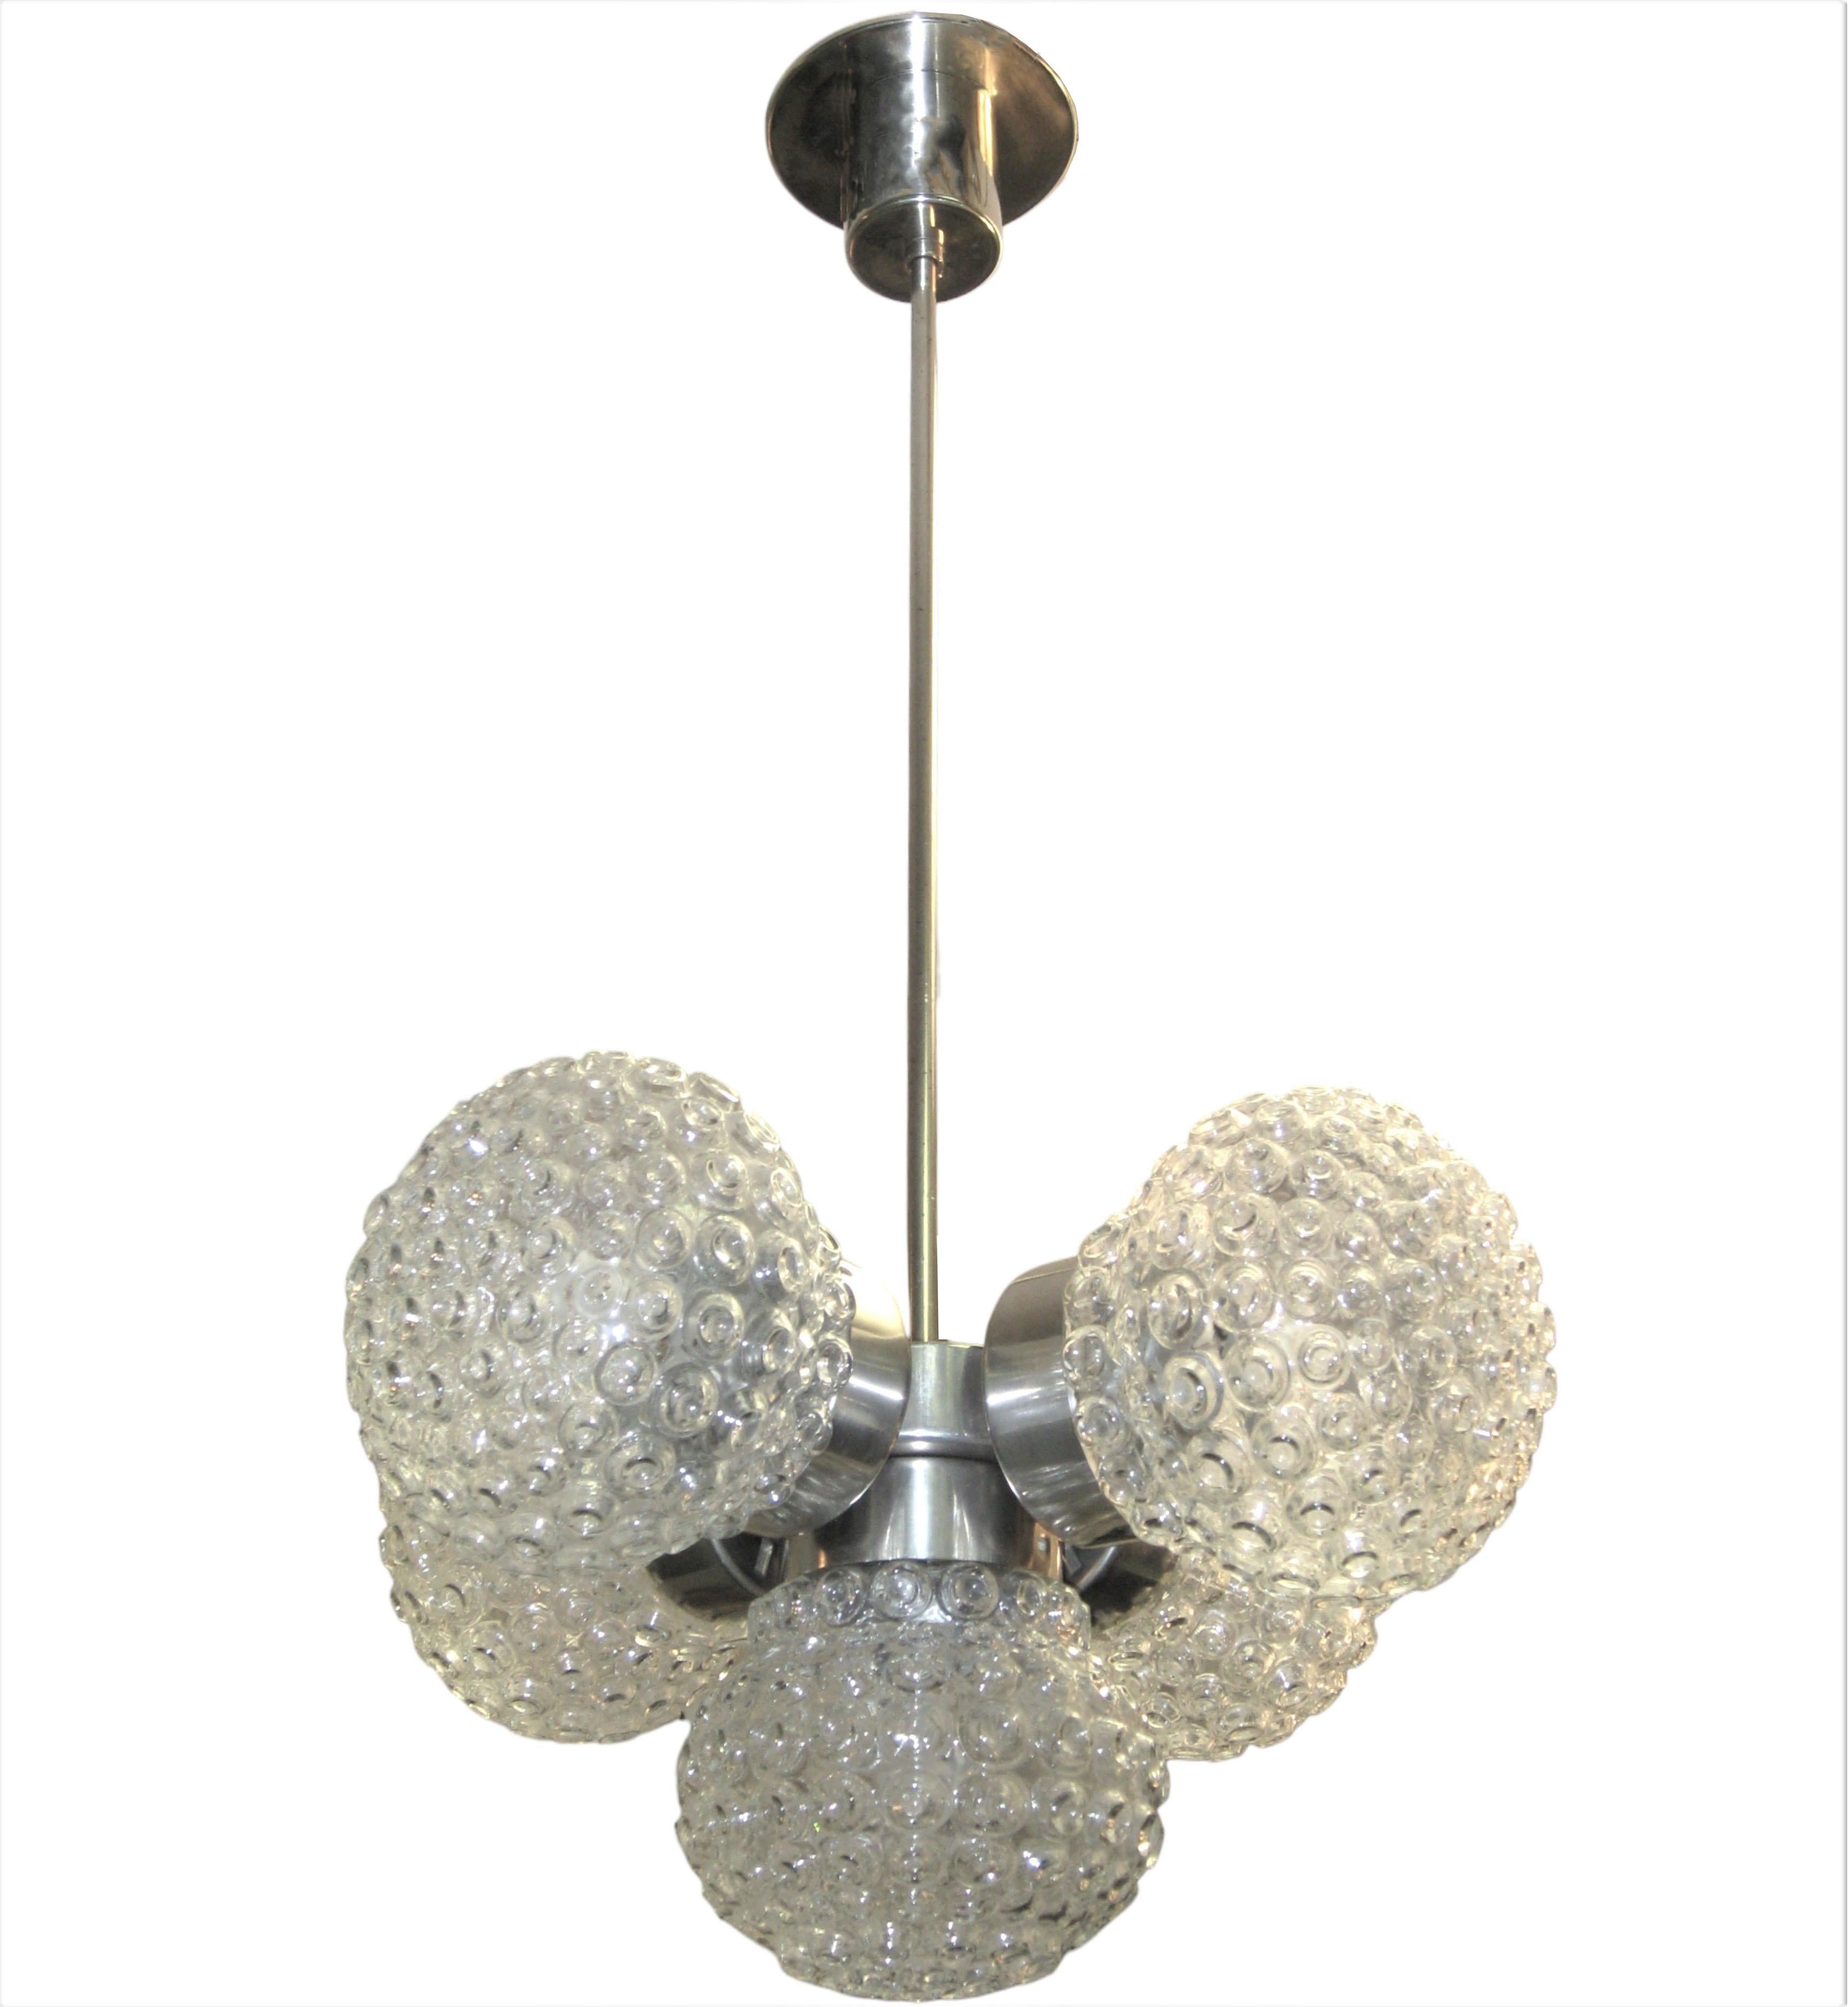 Mid century Modernist Italian ball chandelier.
 Five glass spheres with overall globule pattern delicately suspend from a satin silvery toned nickeled bronze tubular stem and cylindrical canopy.
This pendant light exudes whimsy and charm, while also